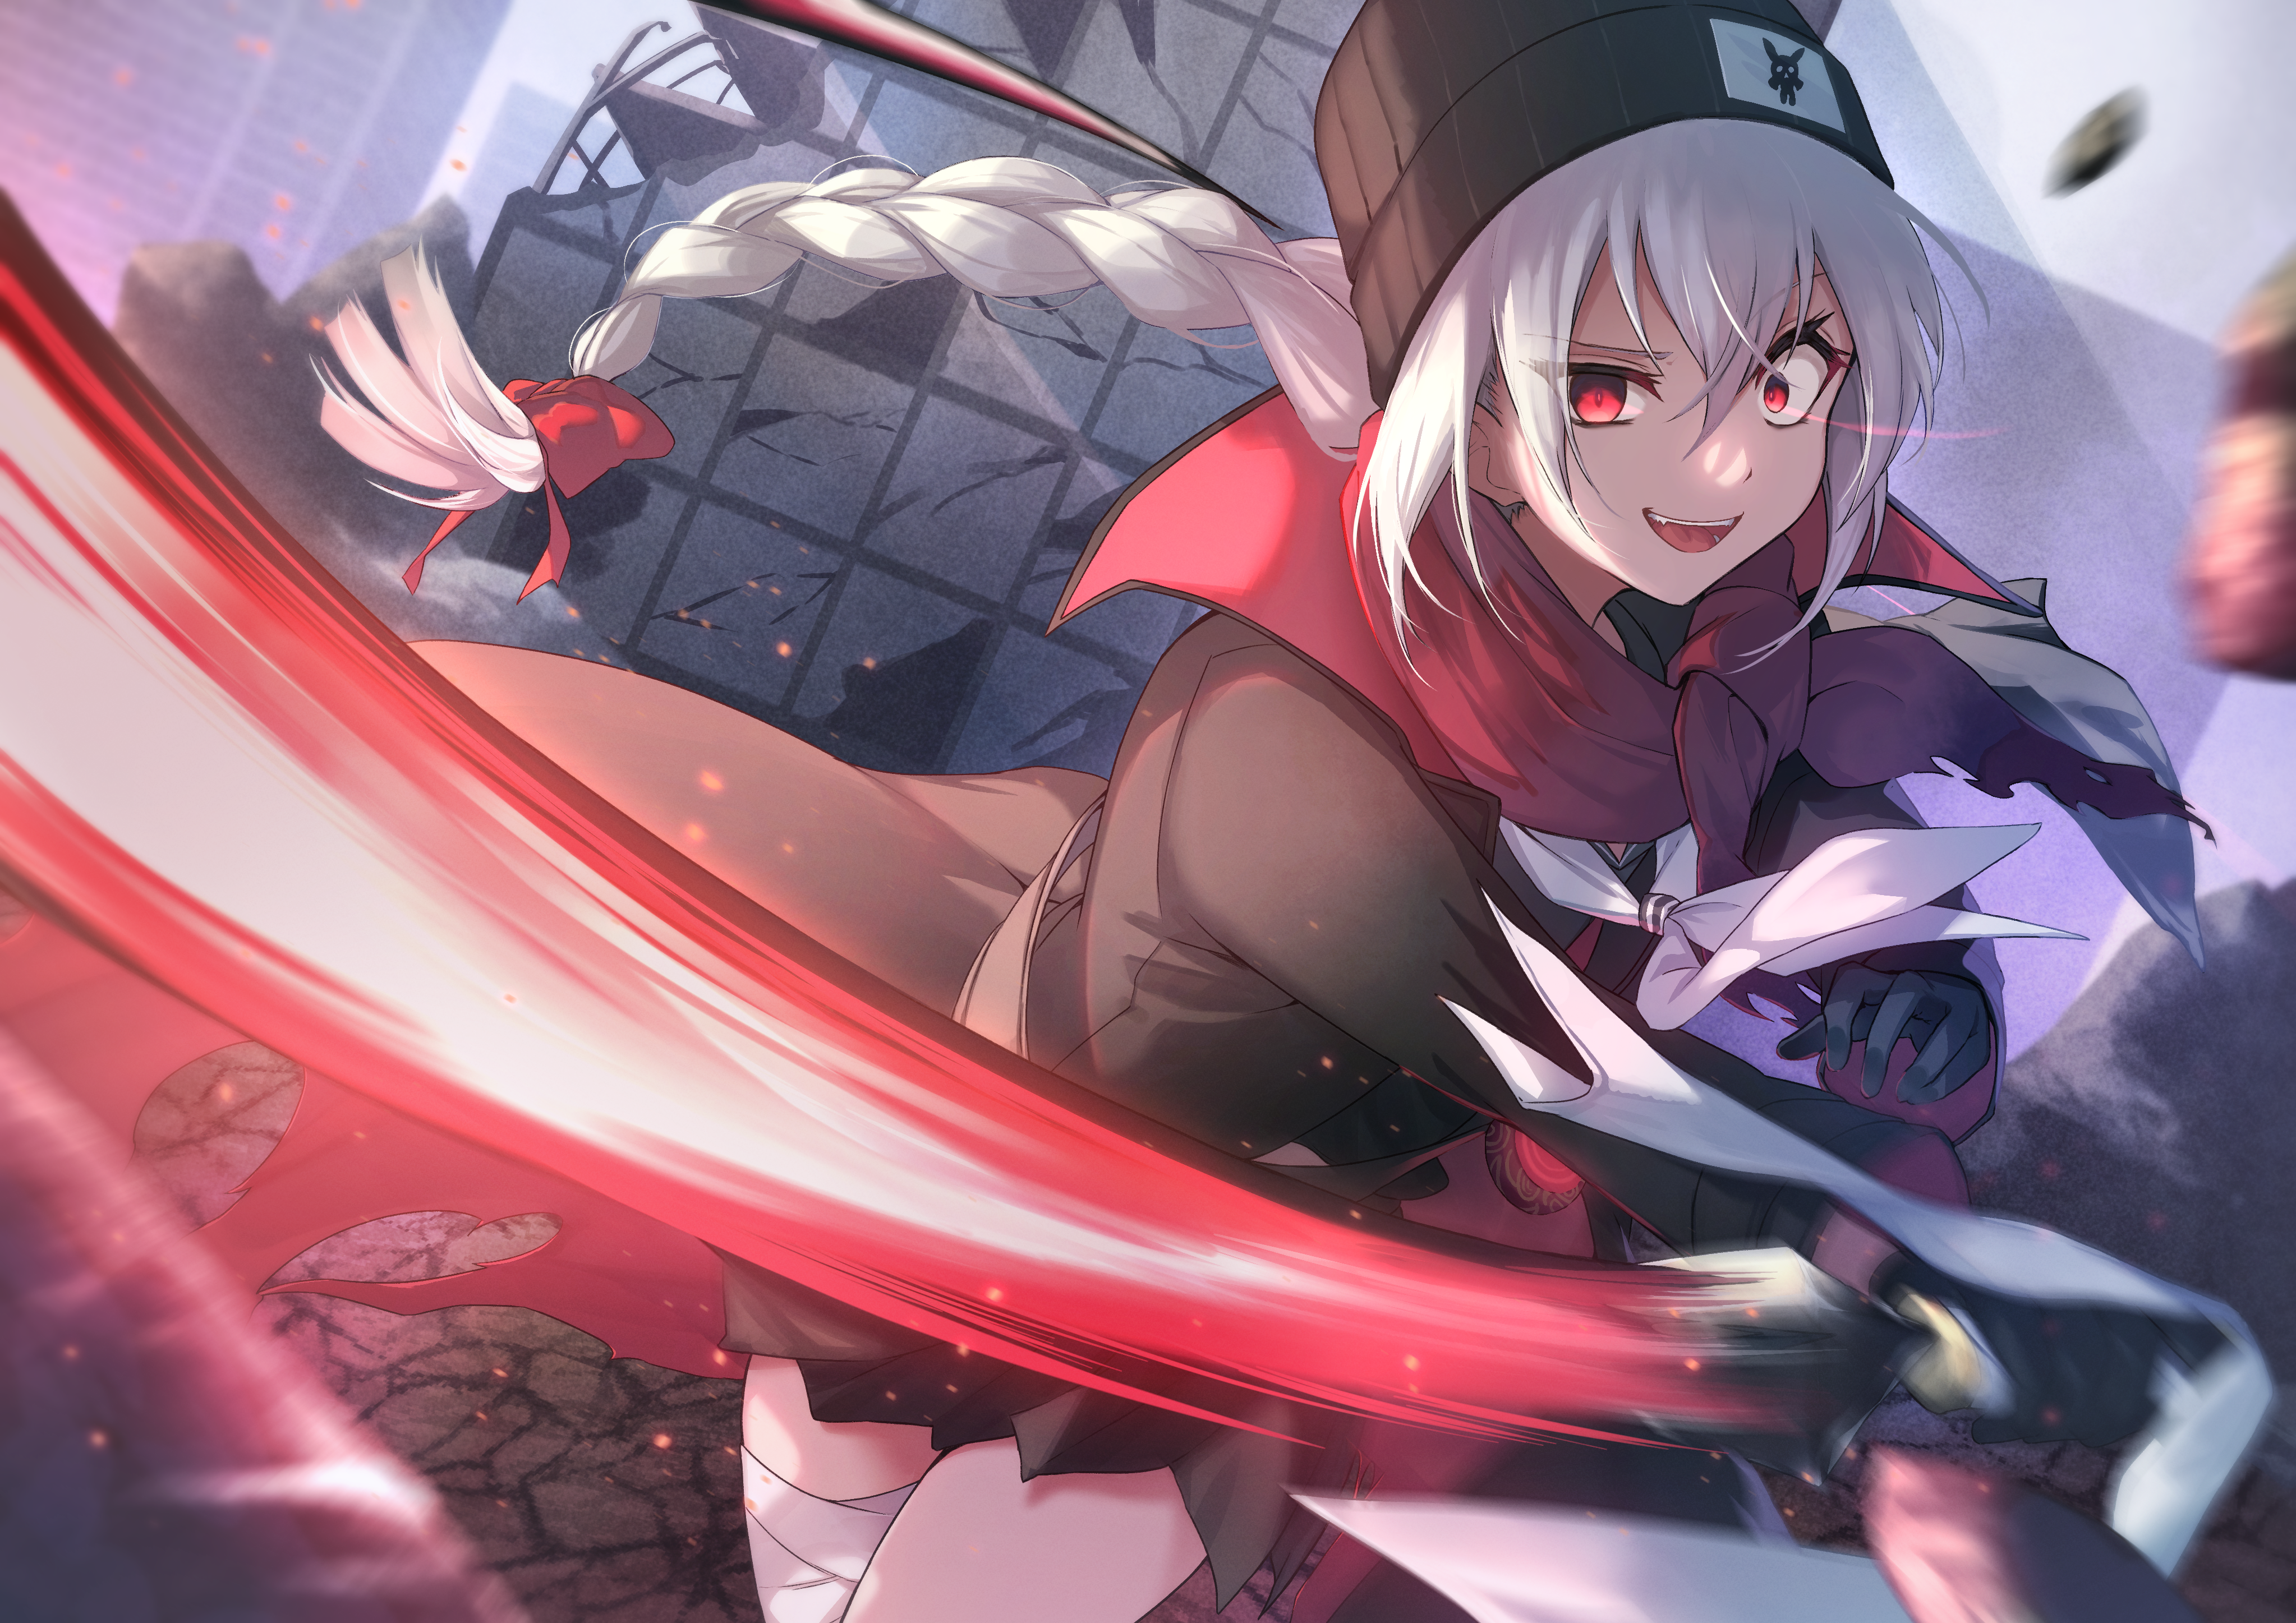 CounterSide  New mobile game from former Closers and Elsword staff  revealed  MMO Culture  Elsword Mmo Mobile game